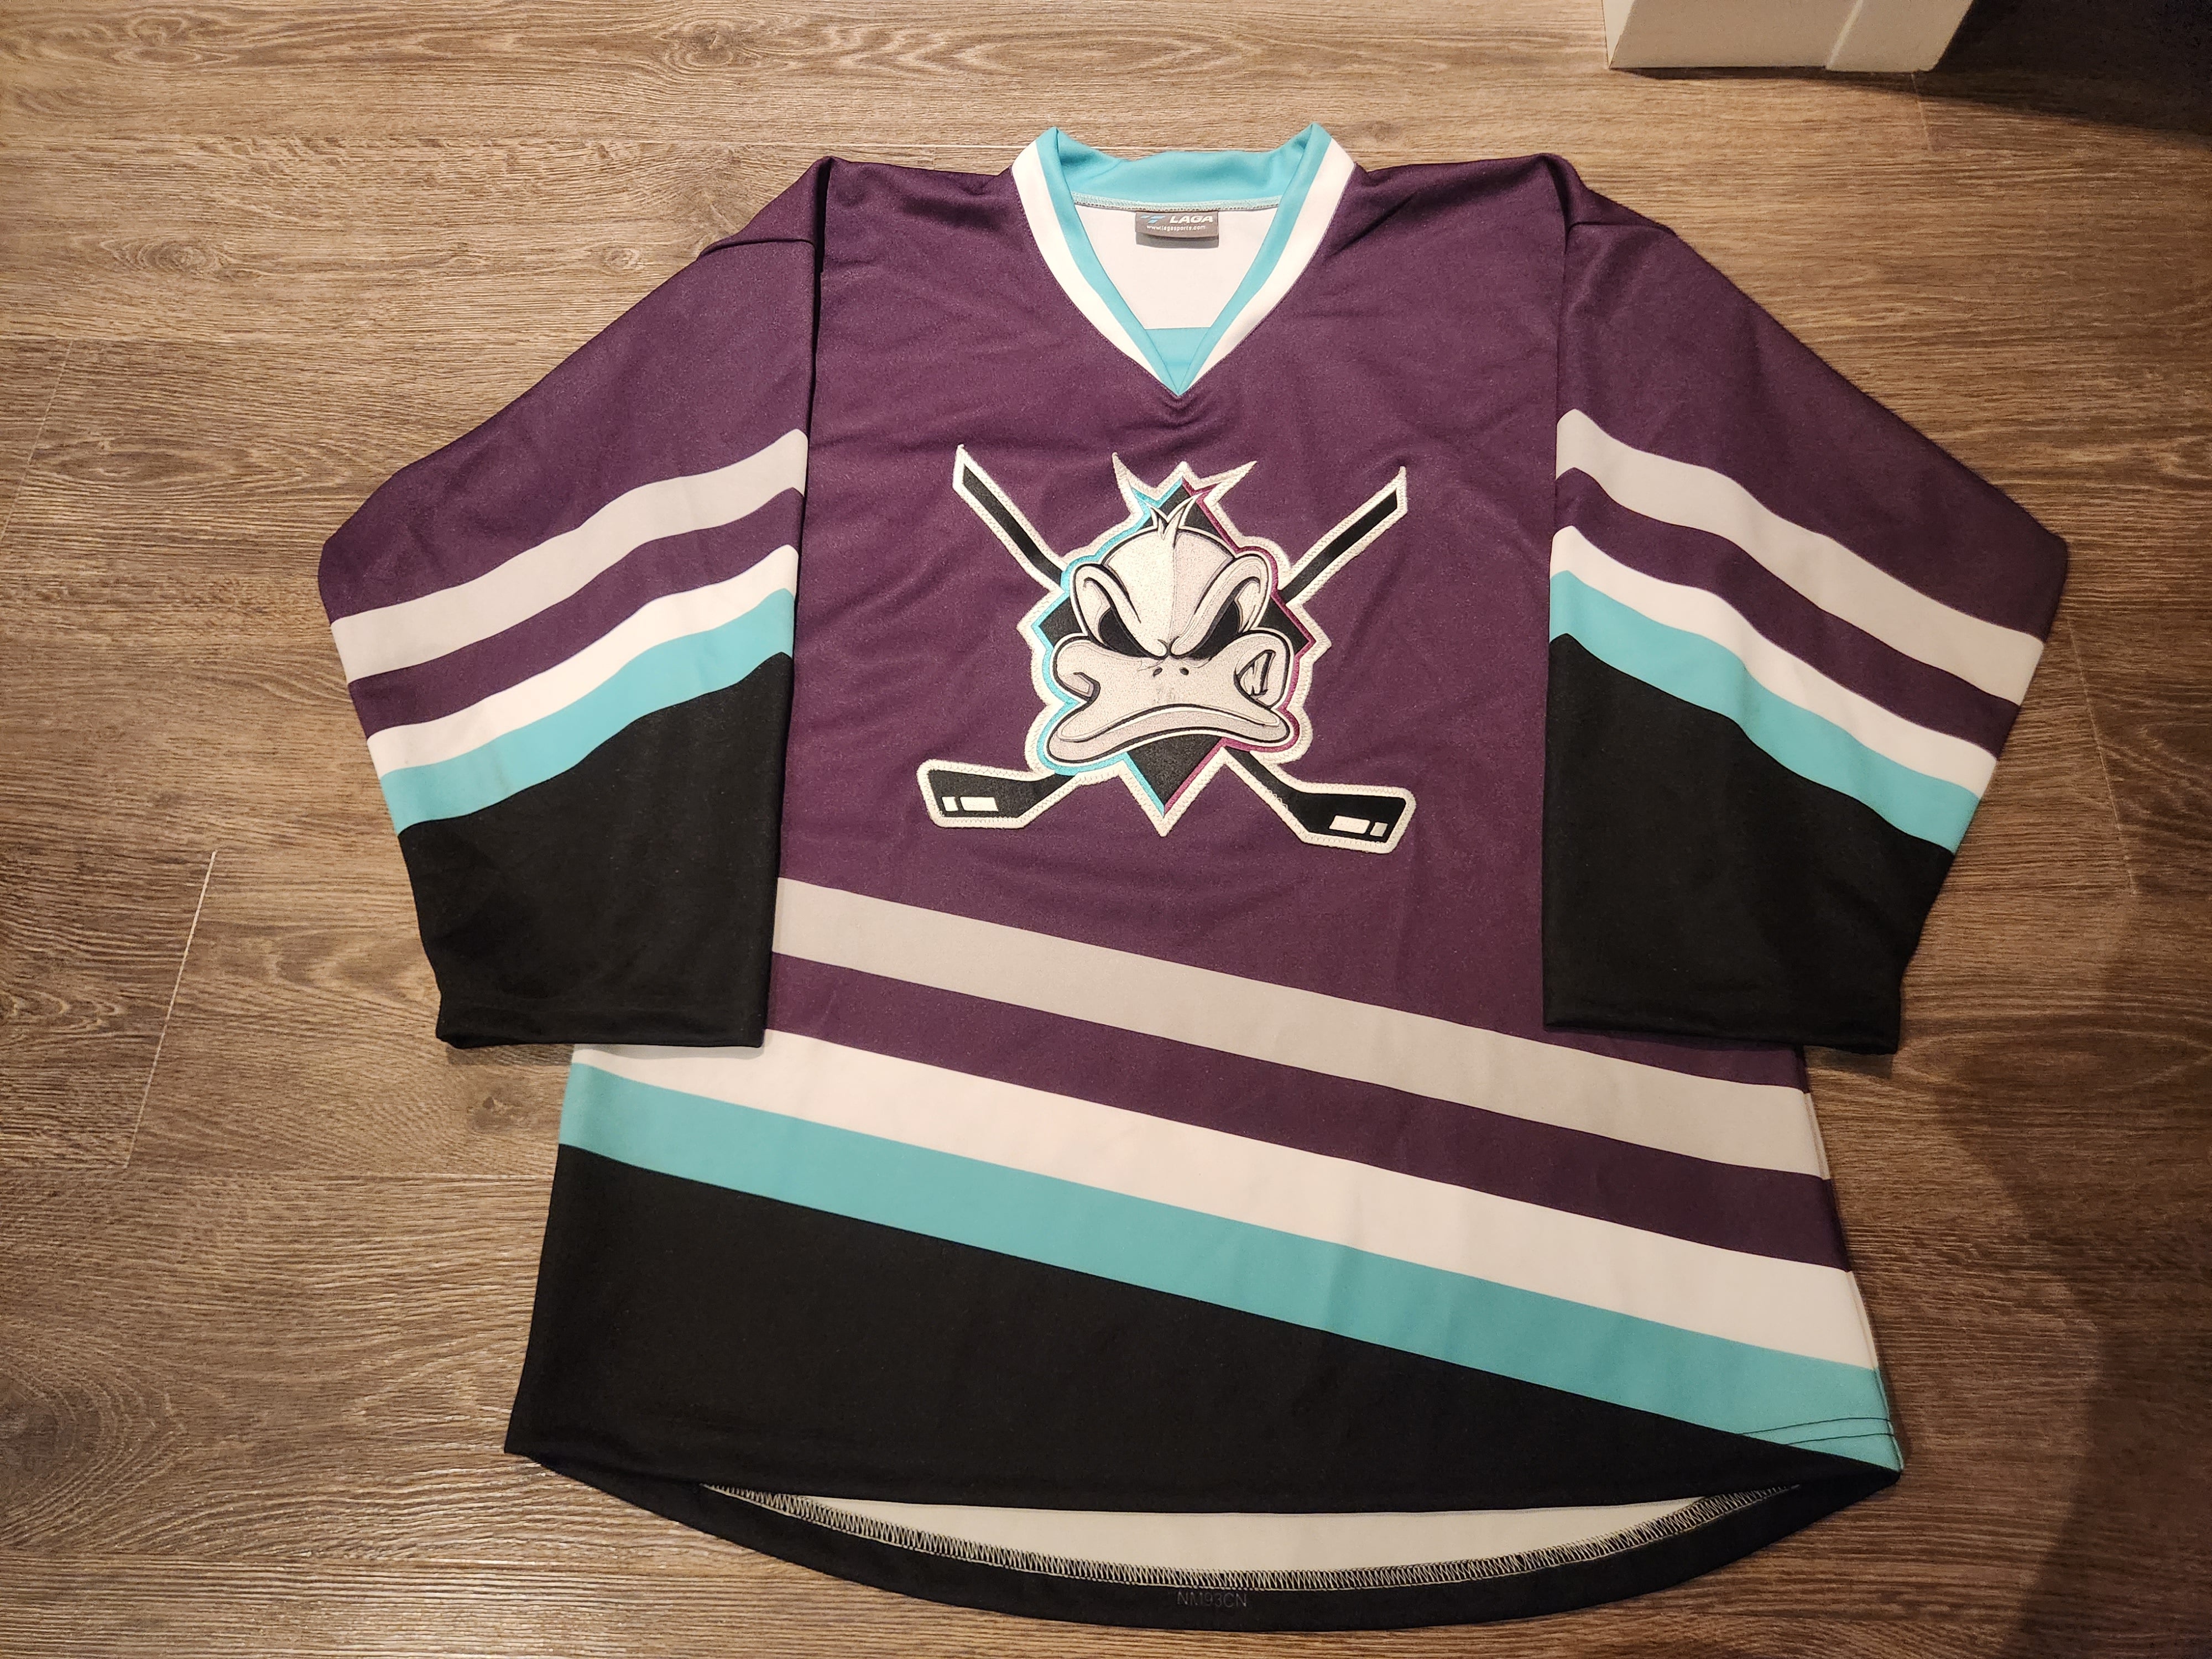 It looks like Disney is FINALLY bringing The Mighty Ducks jersey to the NHL  - HockeyFeed